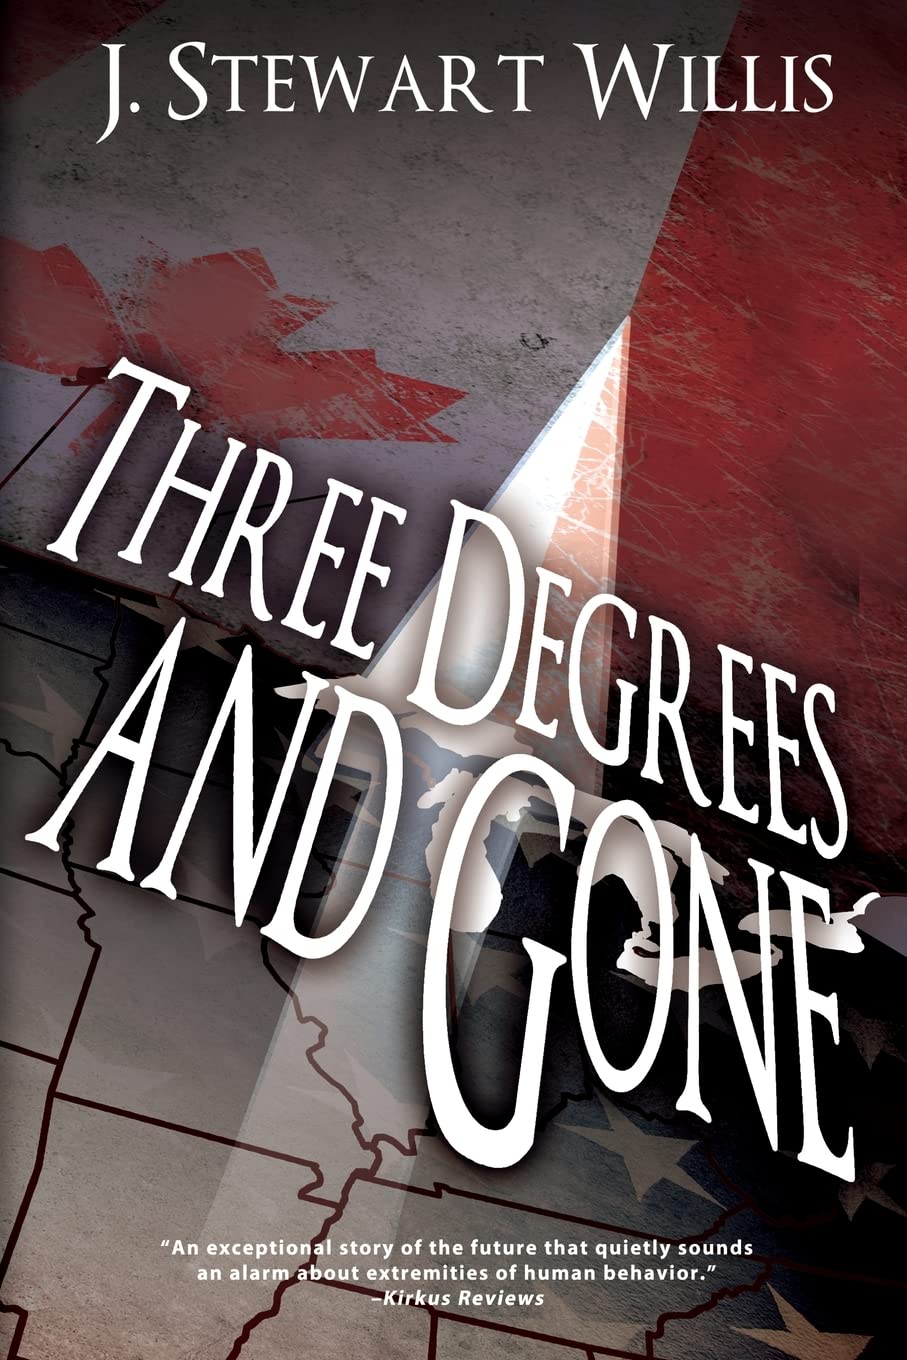 Author’s Tranquility Press Promotes J. Stewart’s Three Degrees and Gone